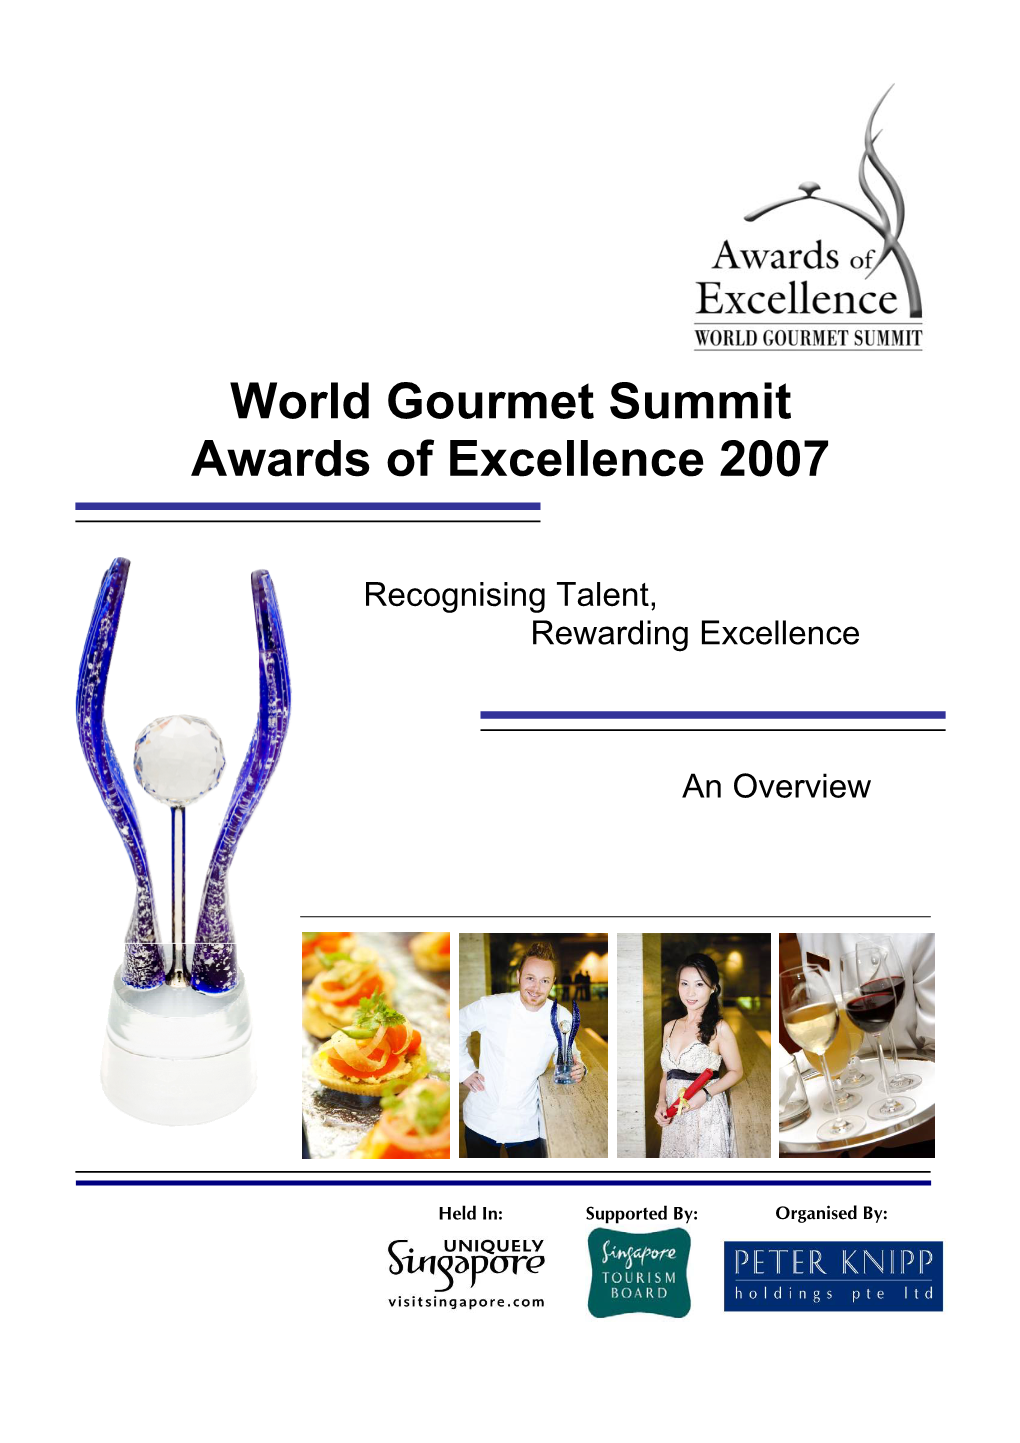 World Gourmet Summit Awards of Excellence 2007